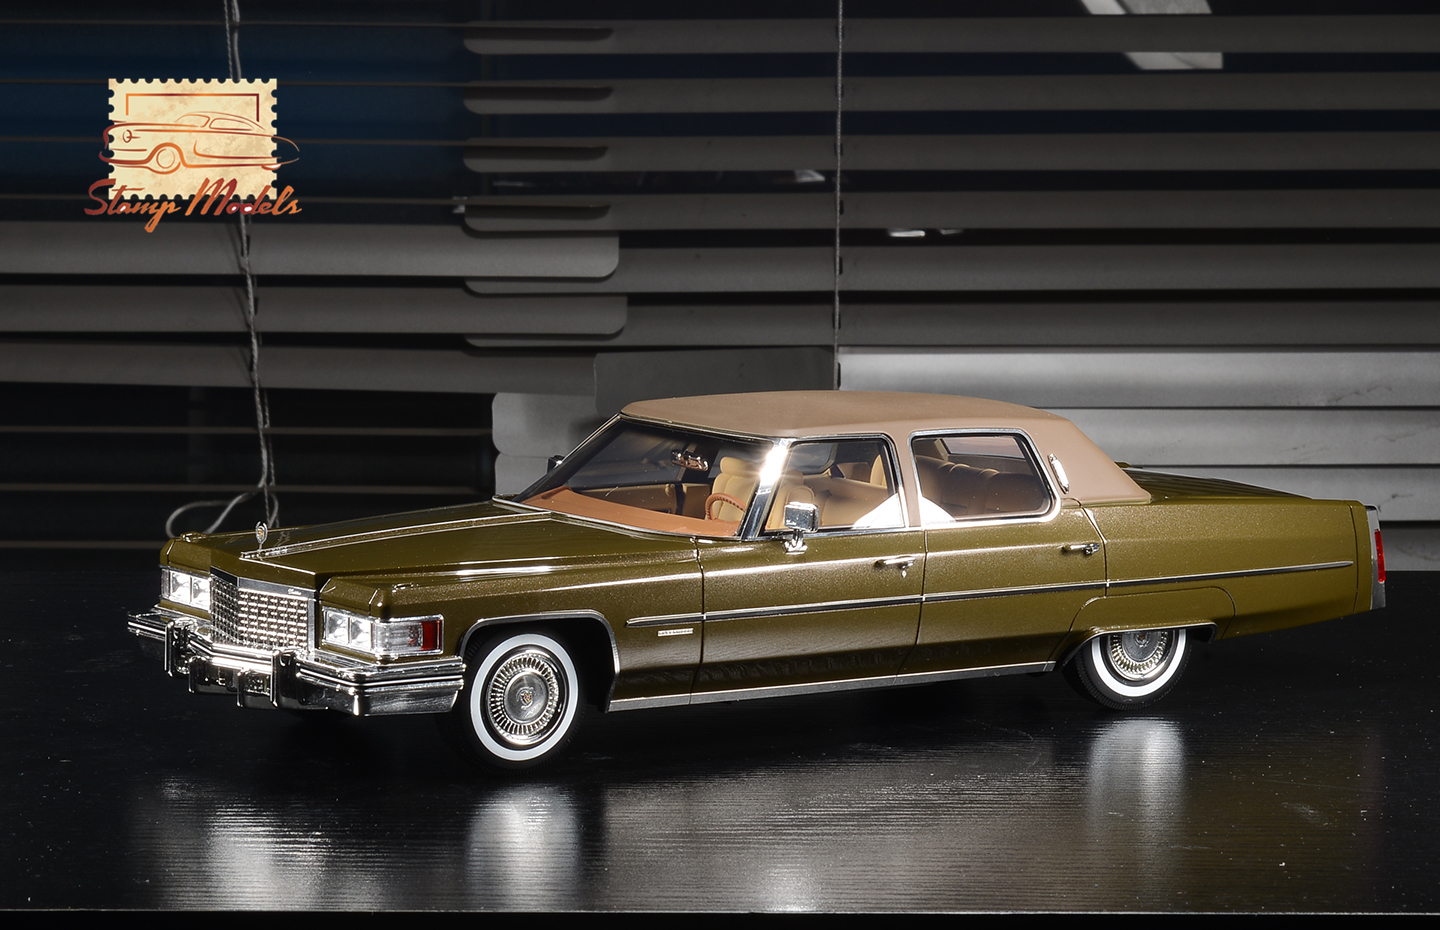 1/18 STM1976202 1976 Cadillac Fleetwood Sixty Special Brougham Brentwood Brown